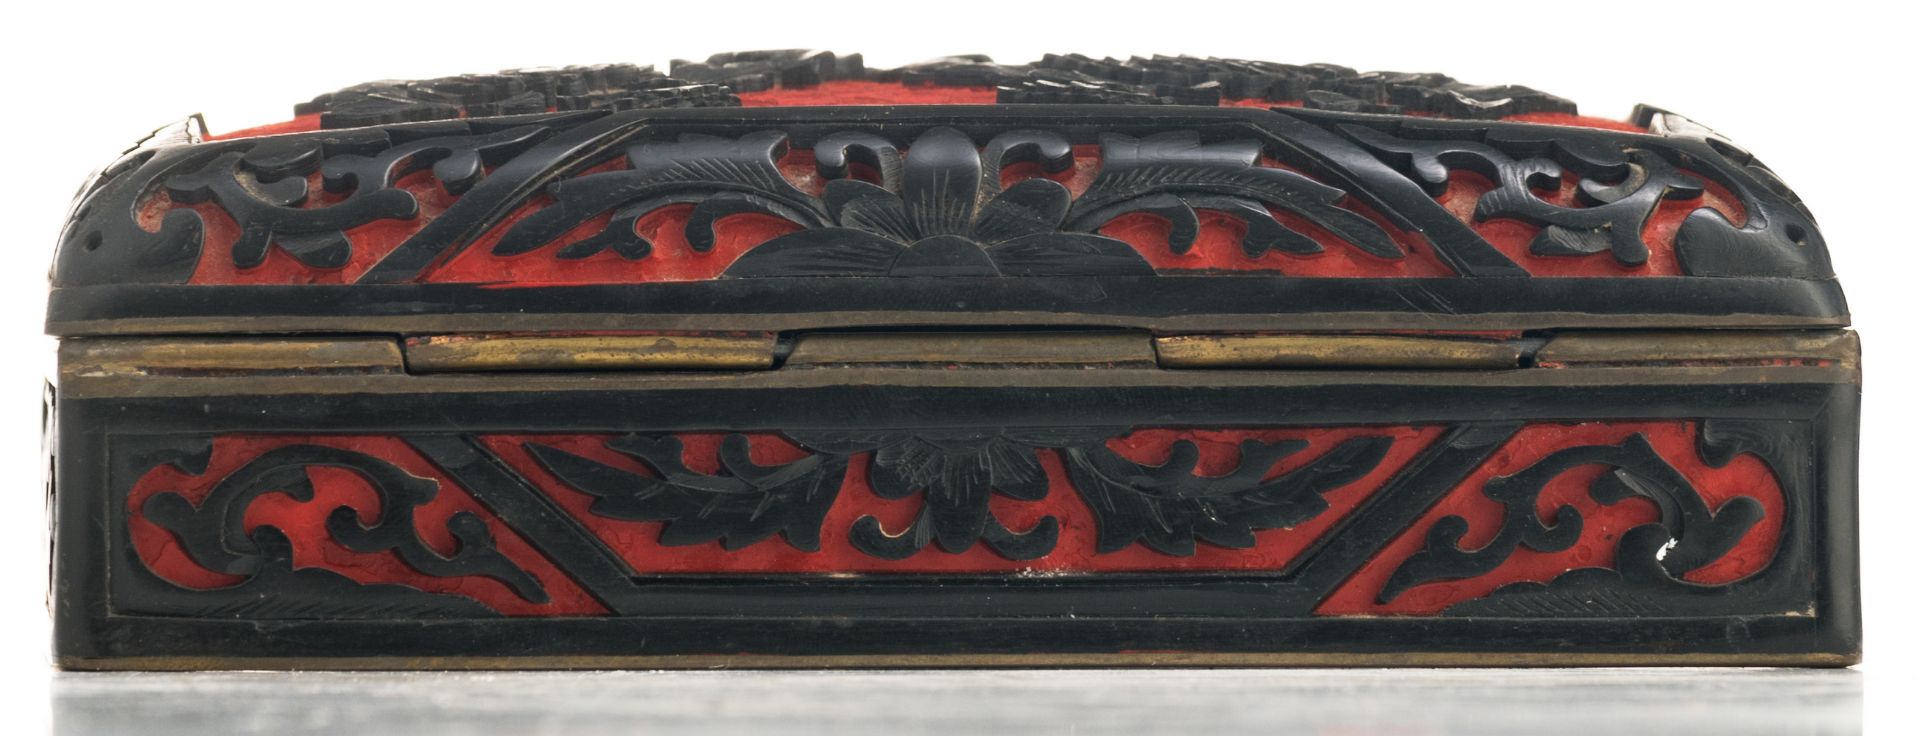 A late 19th / early 20thC Chinese red an black lacquered box and cover, H 5 - W 5 - D 10 cm - Image 4 of 8